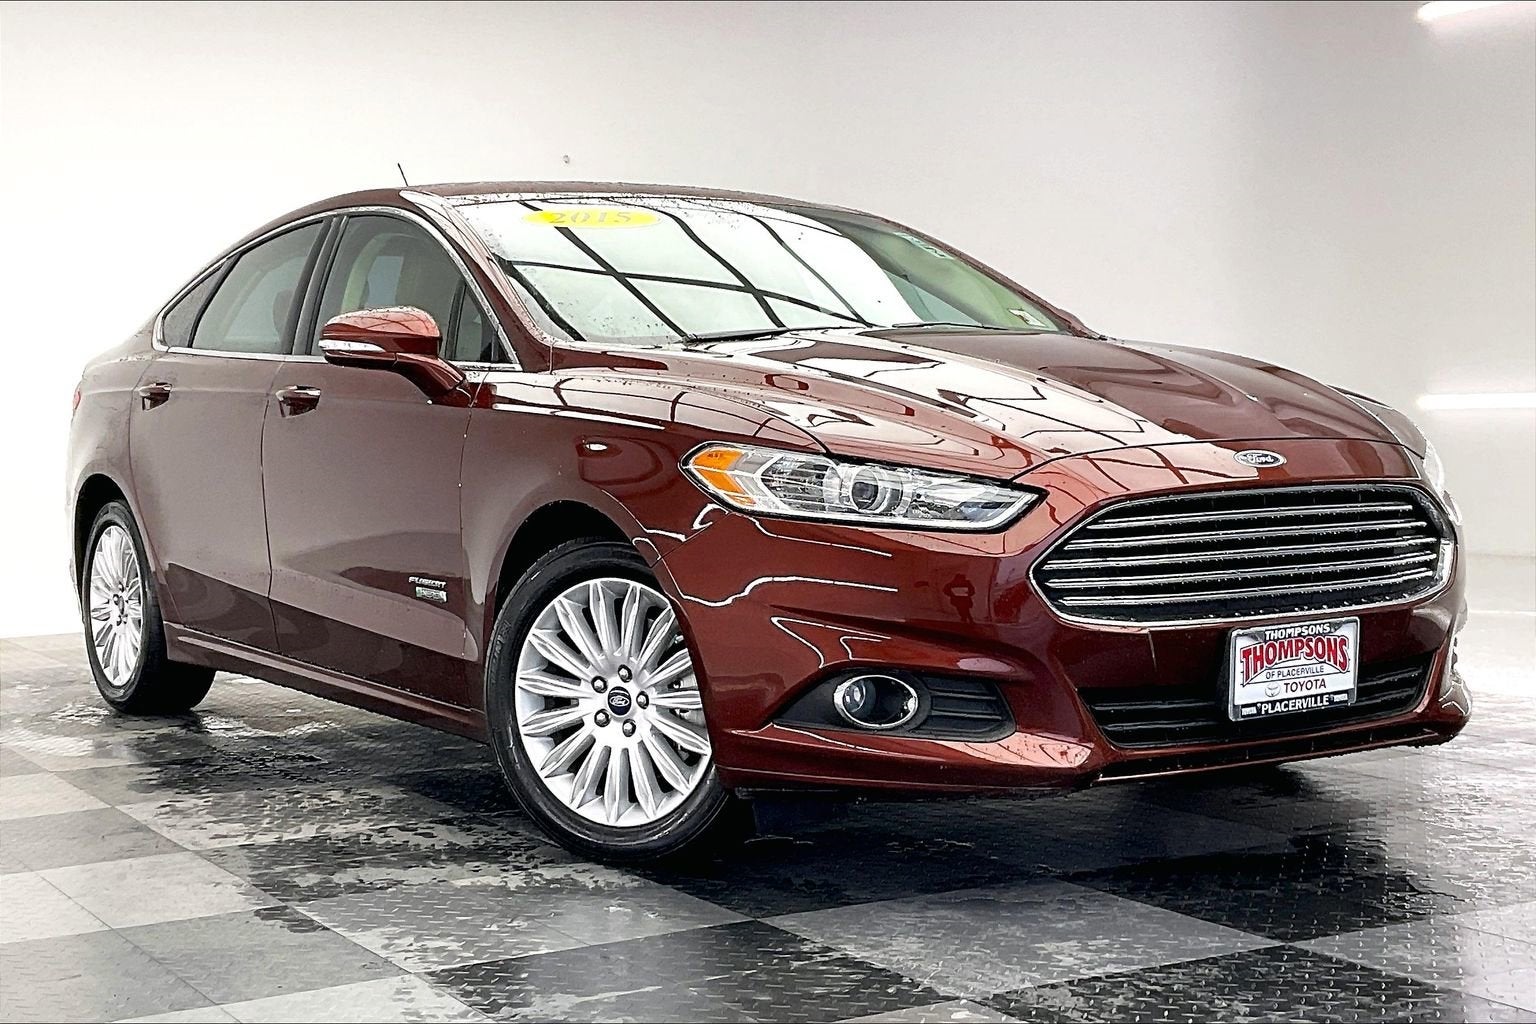 Used 2015 Ford Fusion Energi For Sale Placerville CA | Near Cameron Park |  50077A